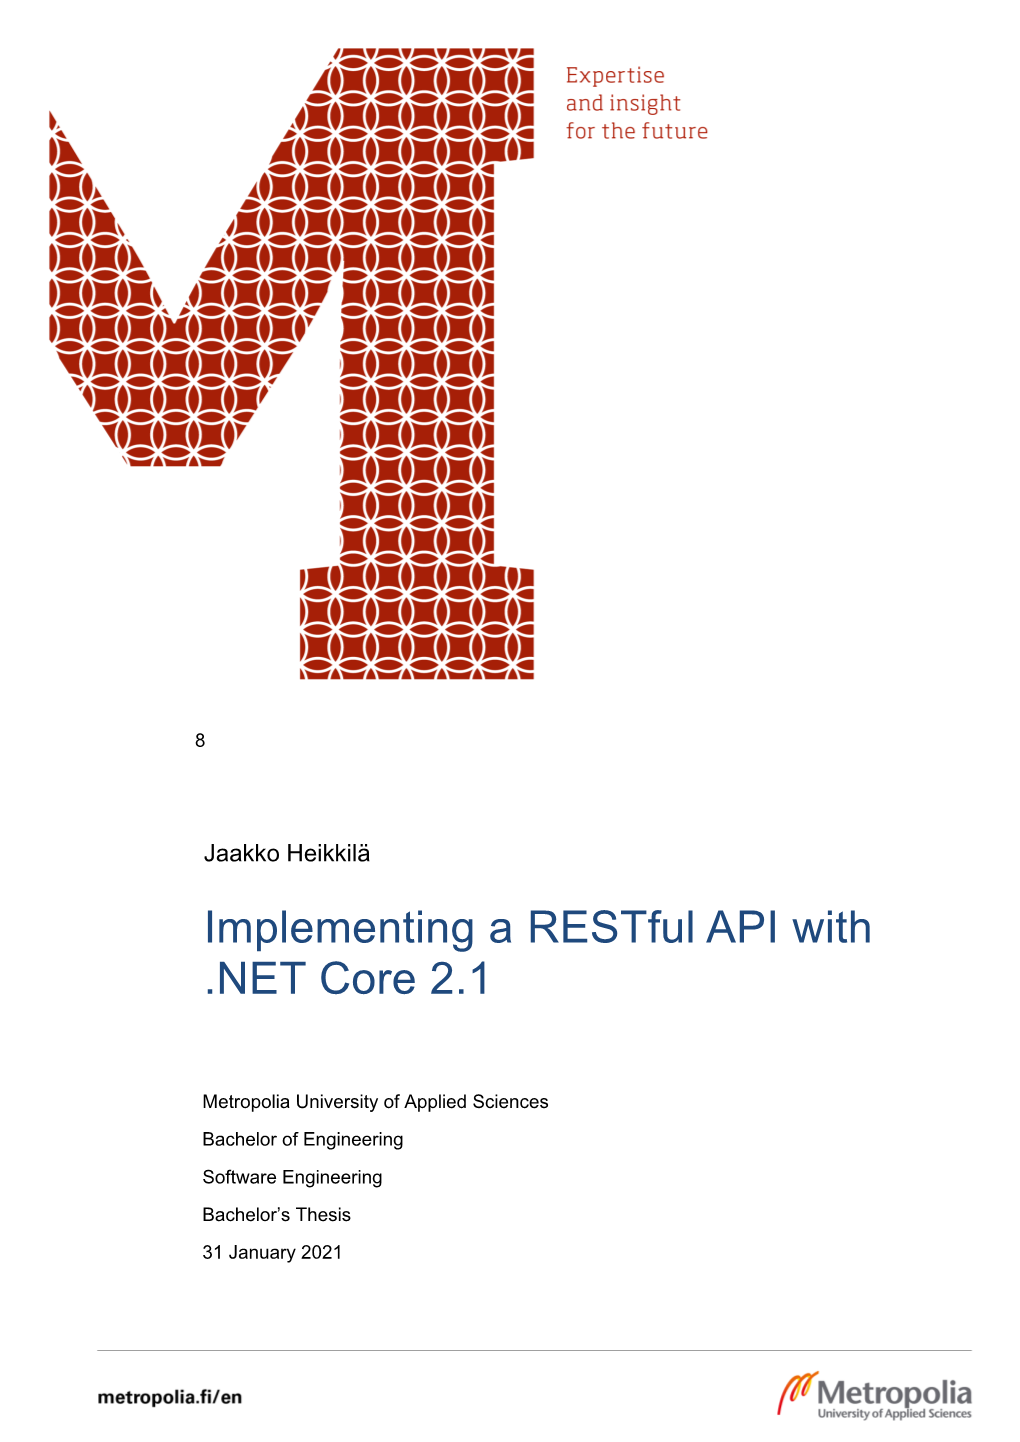 Implementing a Restful API with .NET Core 2.1